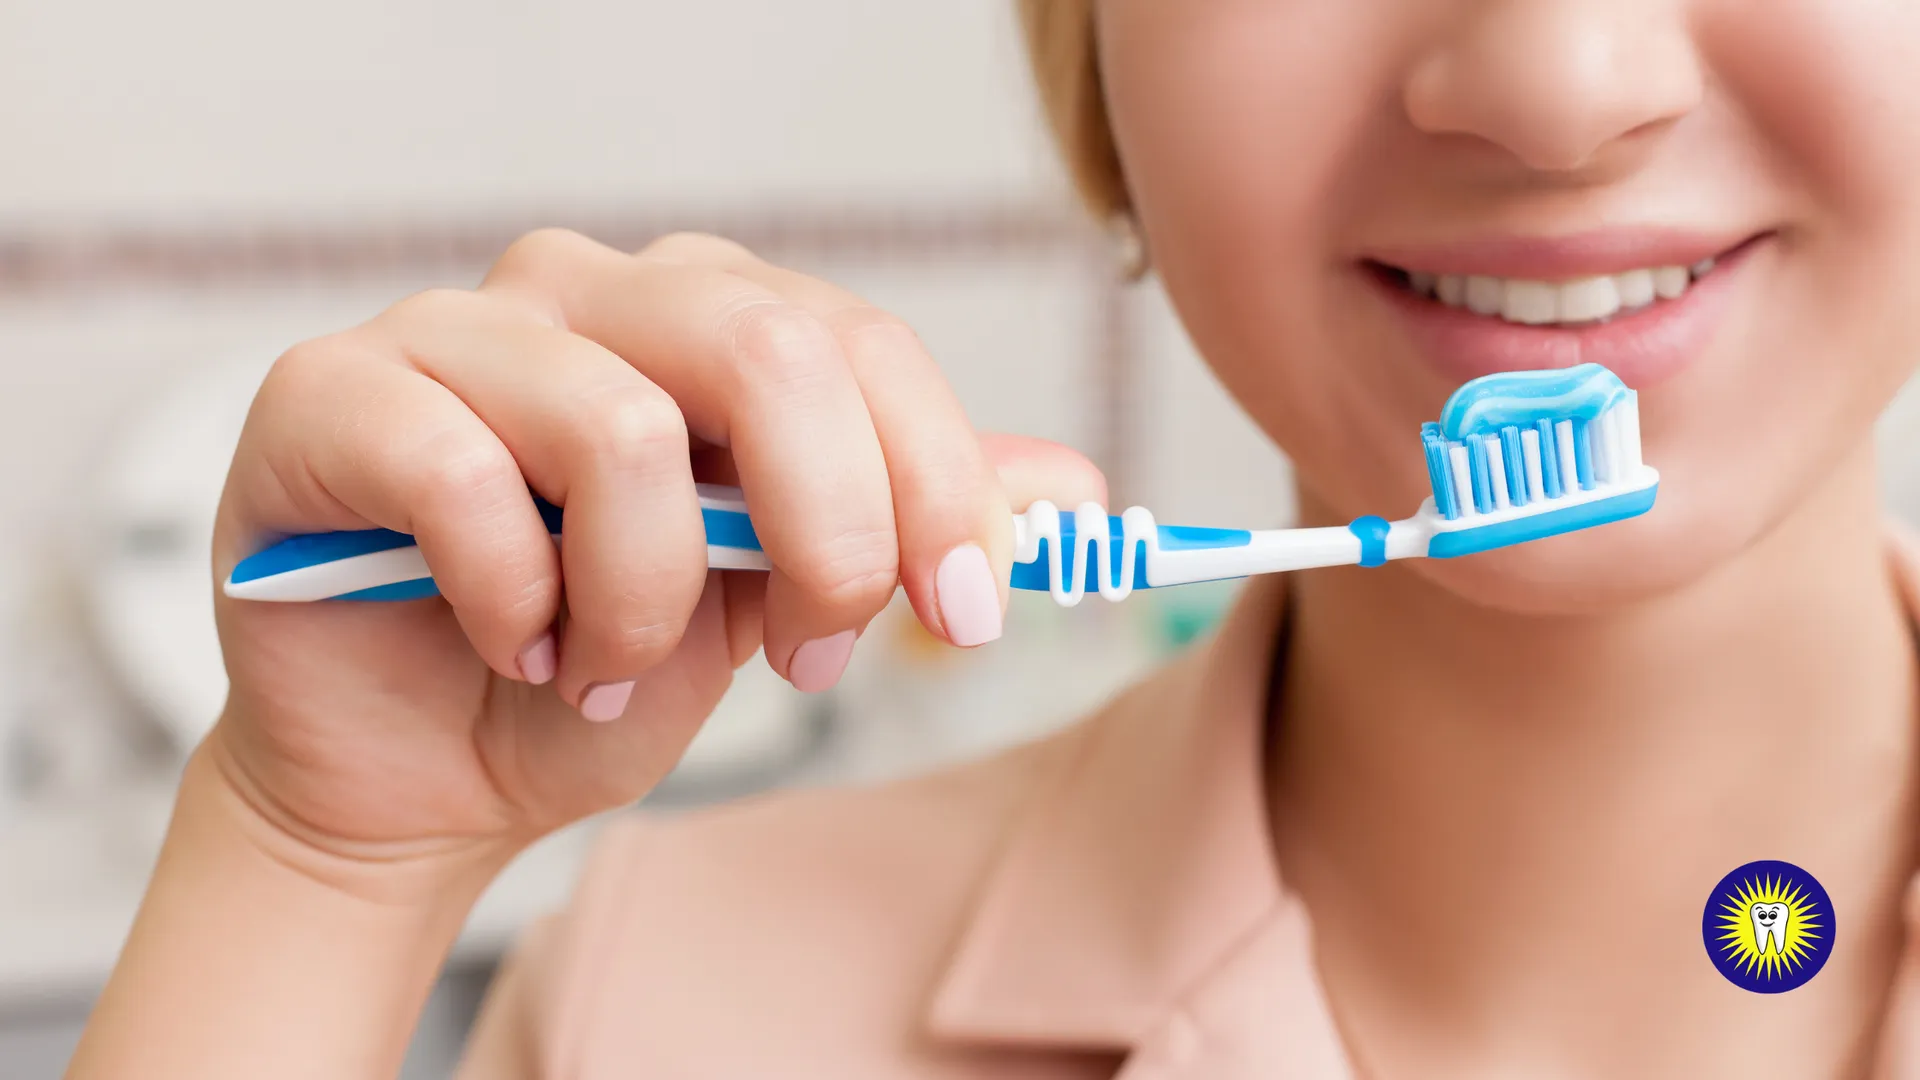 How often should you buy a new toothbrush